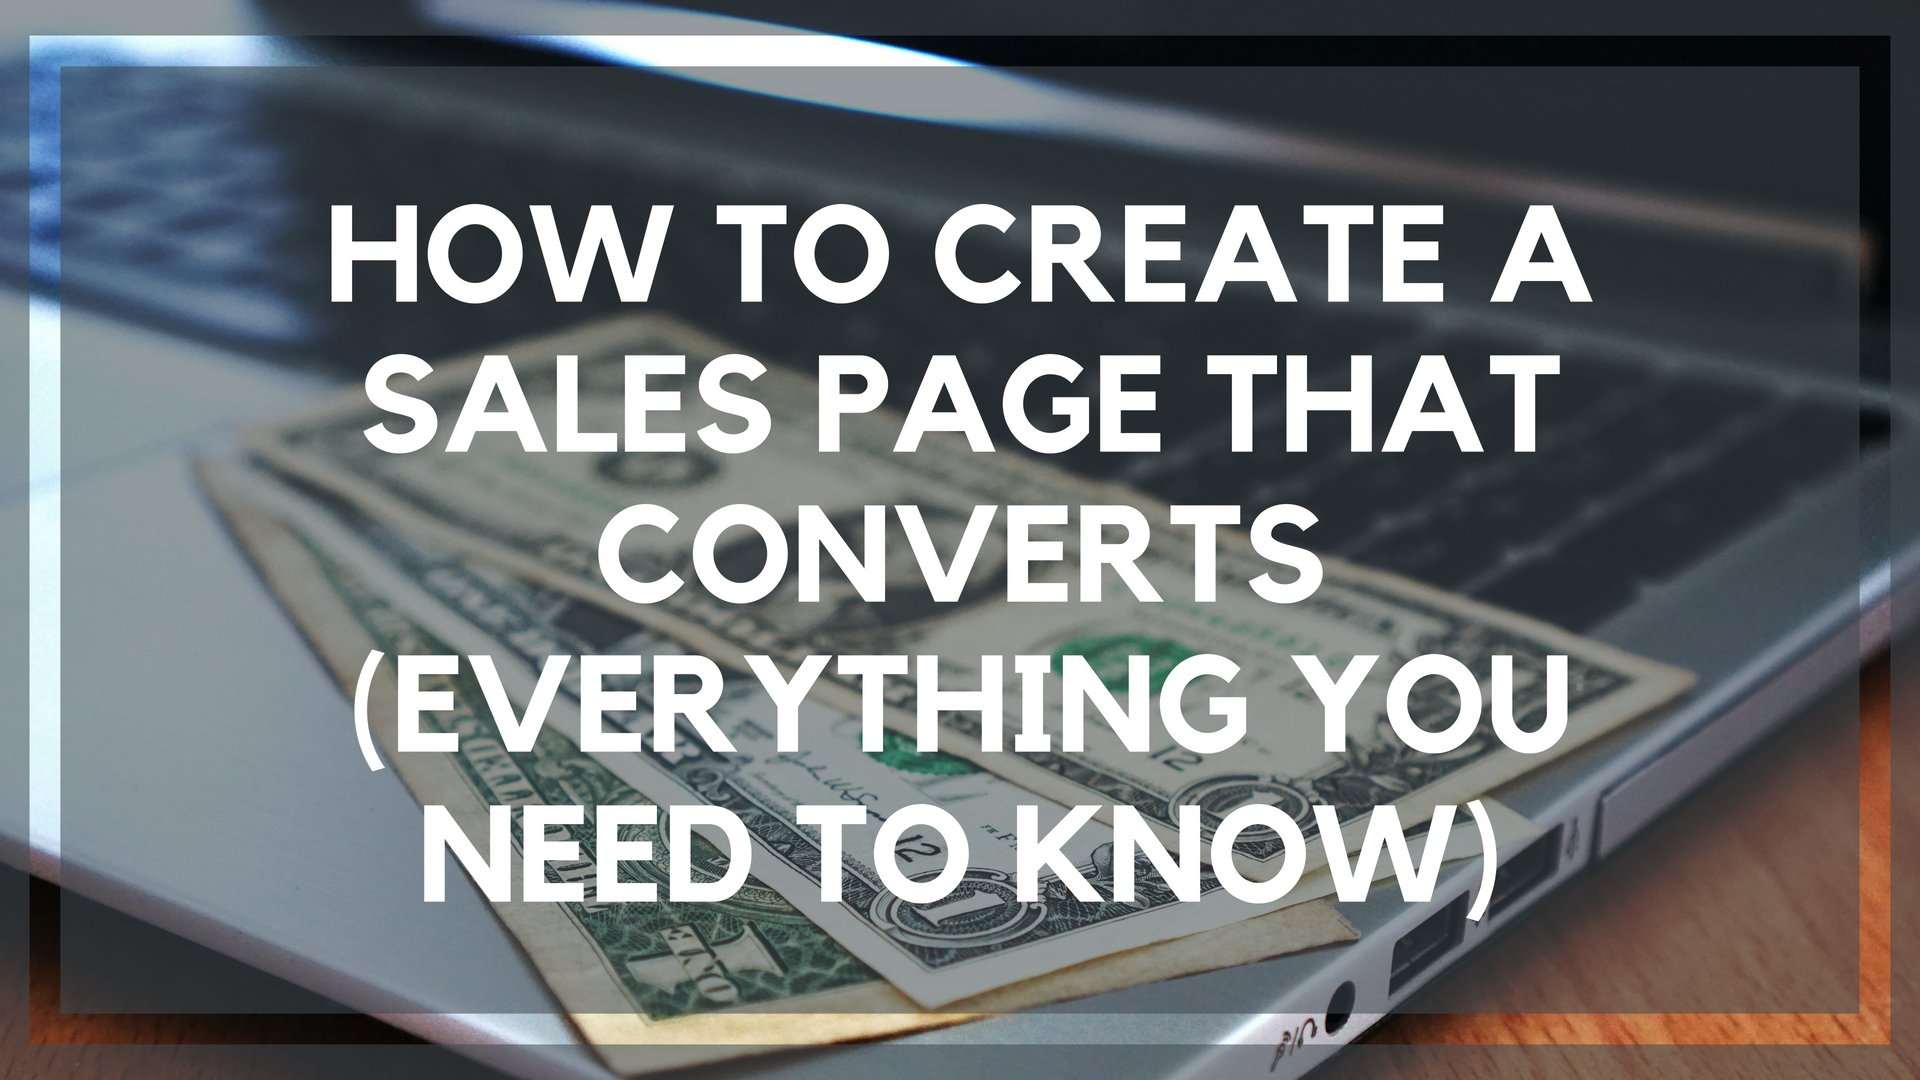 How to Create a Sales Page that Converts